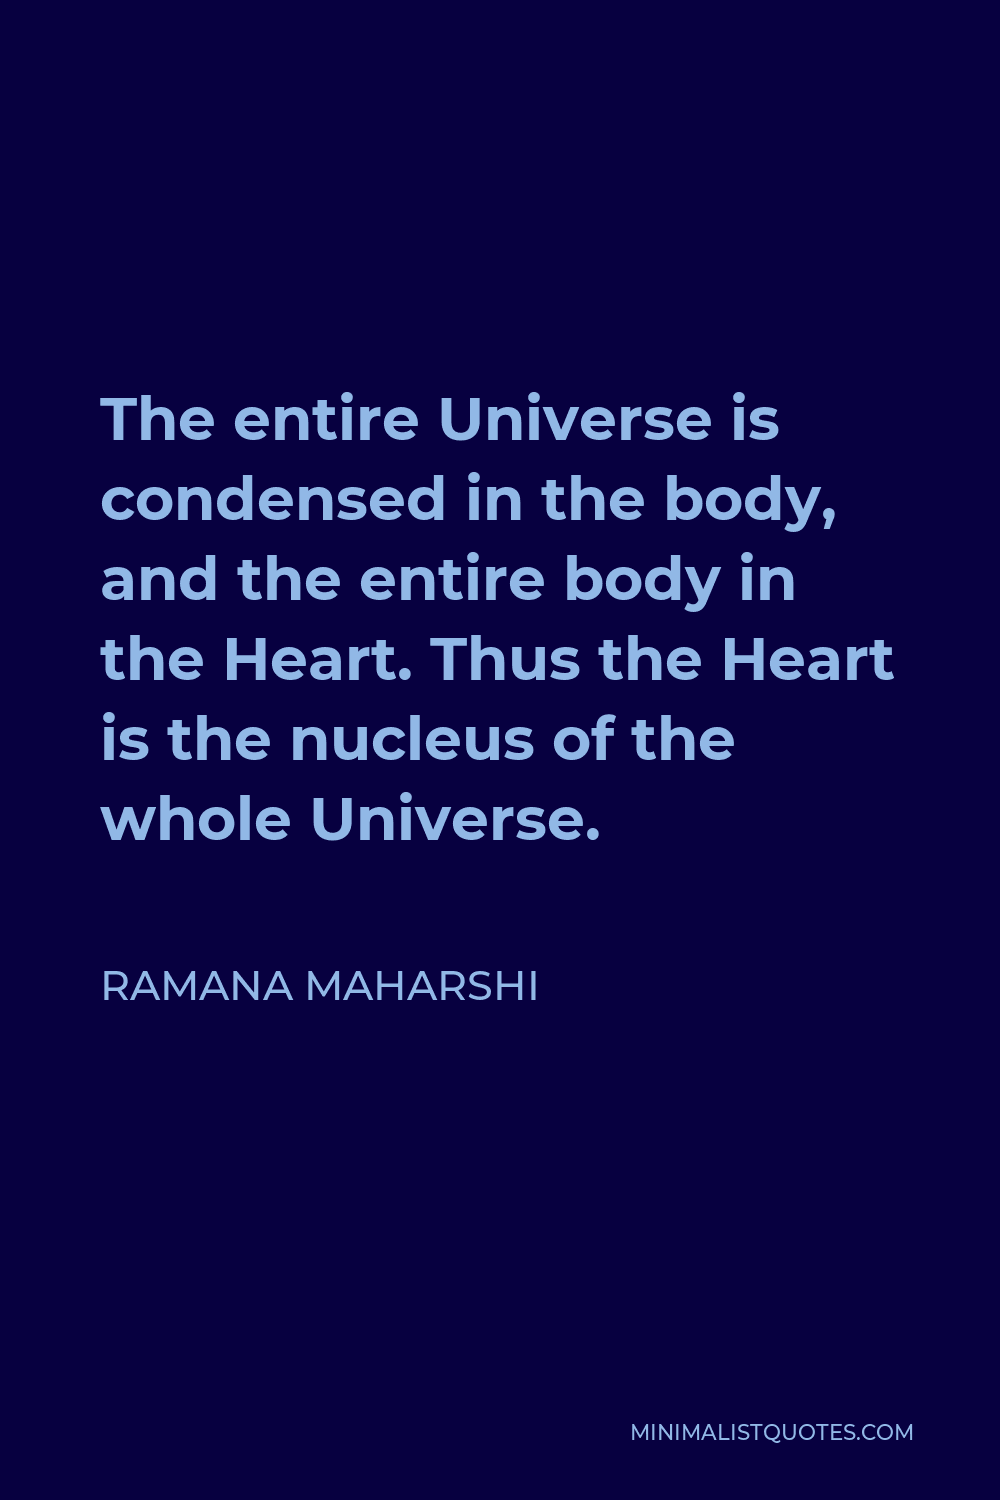 Ramana Maharshi Quote - The entire Universe is condensed in the body, and the entire body in the Heart. Thus the Heart is the nucleus of the whole Universe.